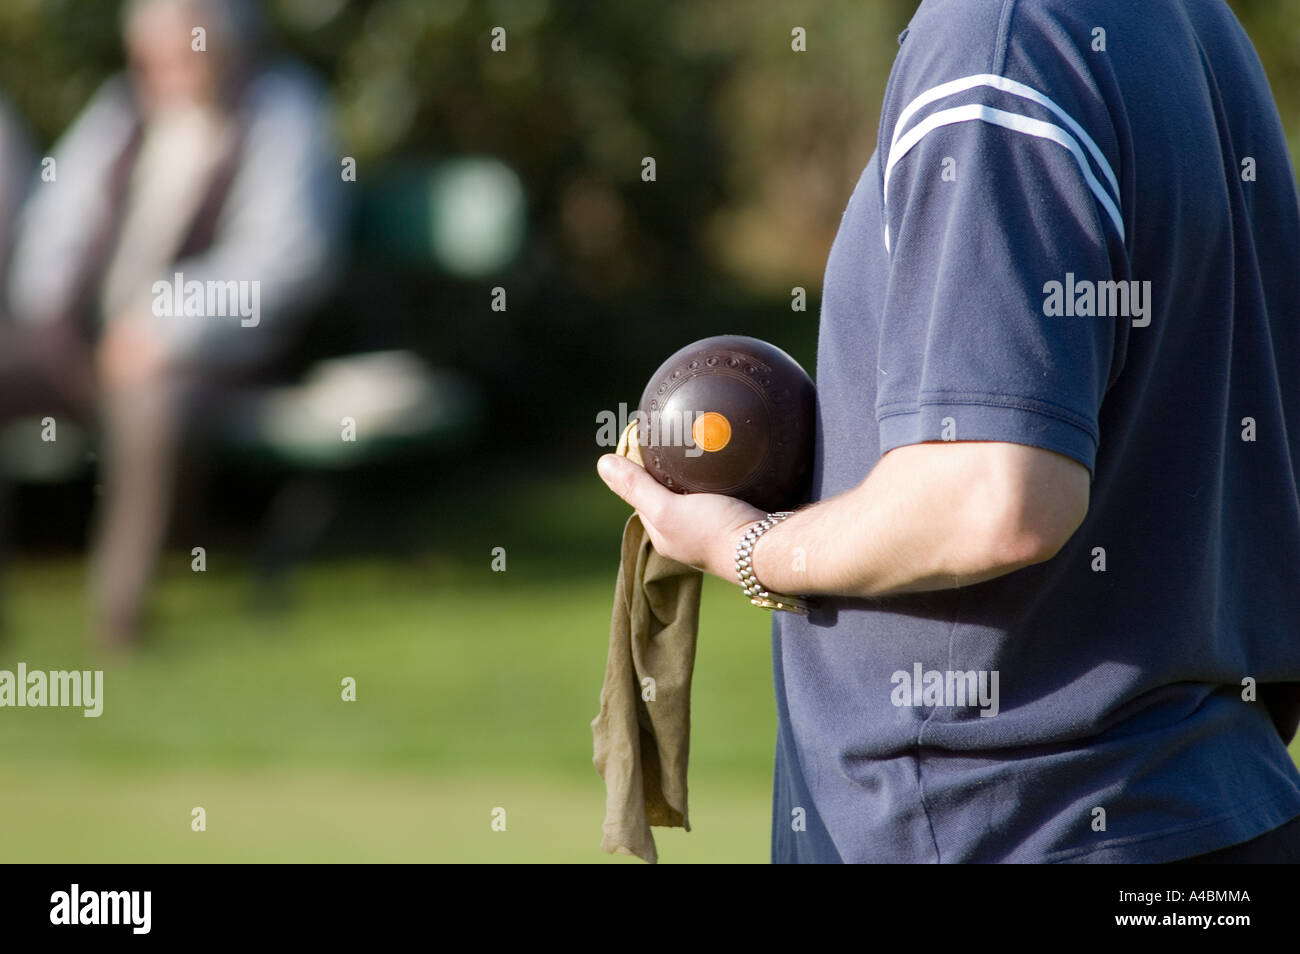 A profile of a young male crown green bowler on a sunny day in England with bowl in hand contemplating his shot with spectators Stock Photo